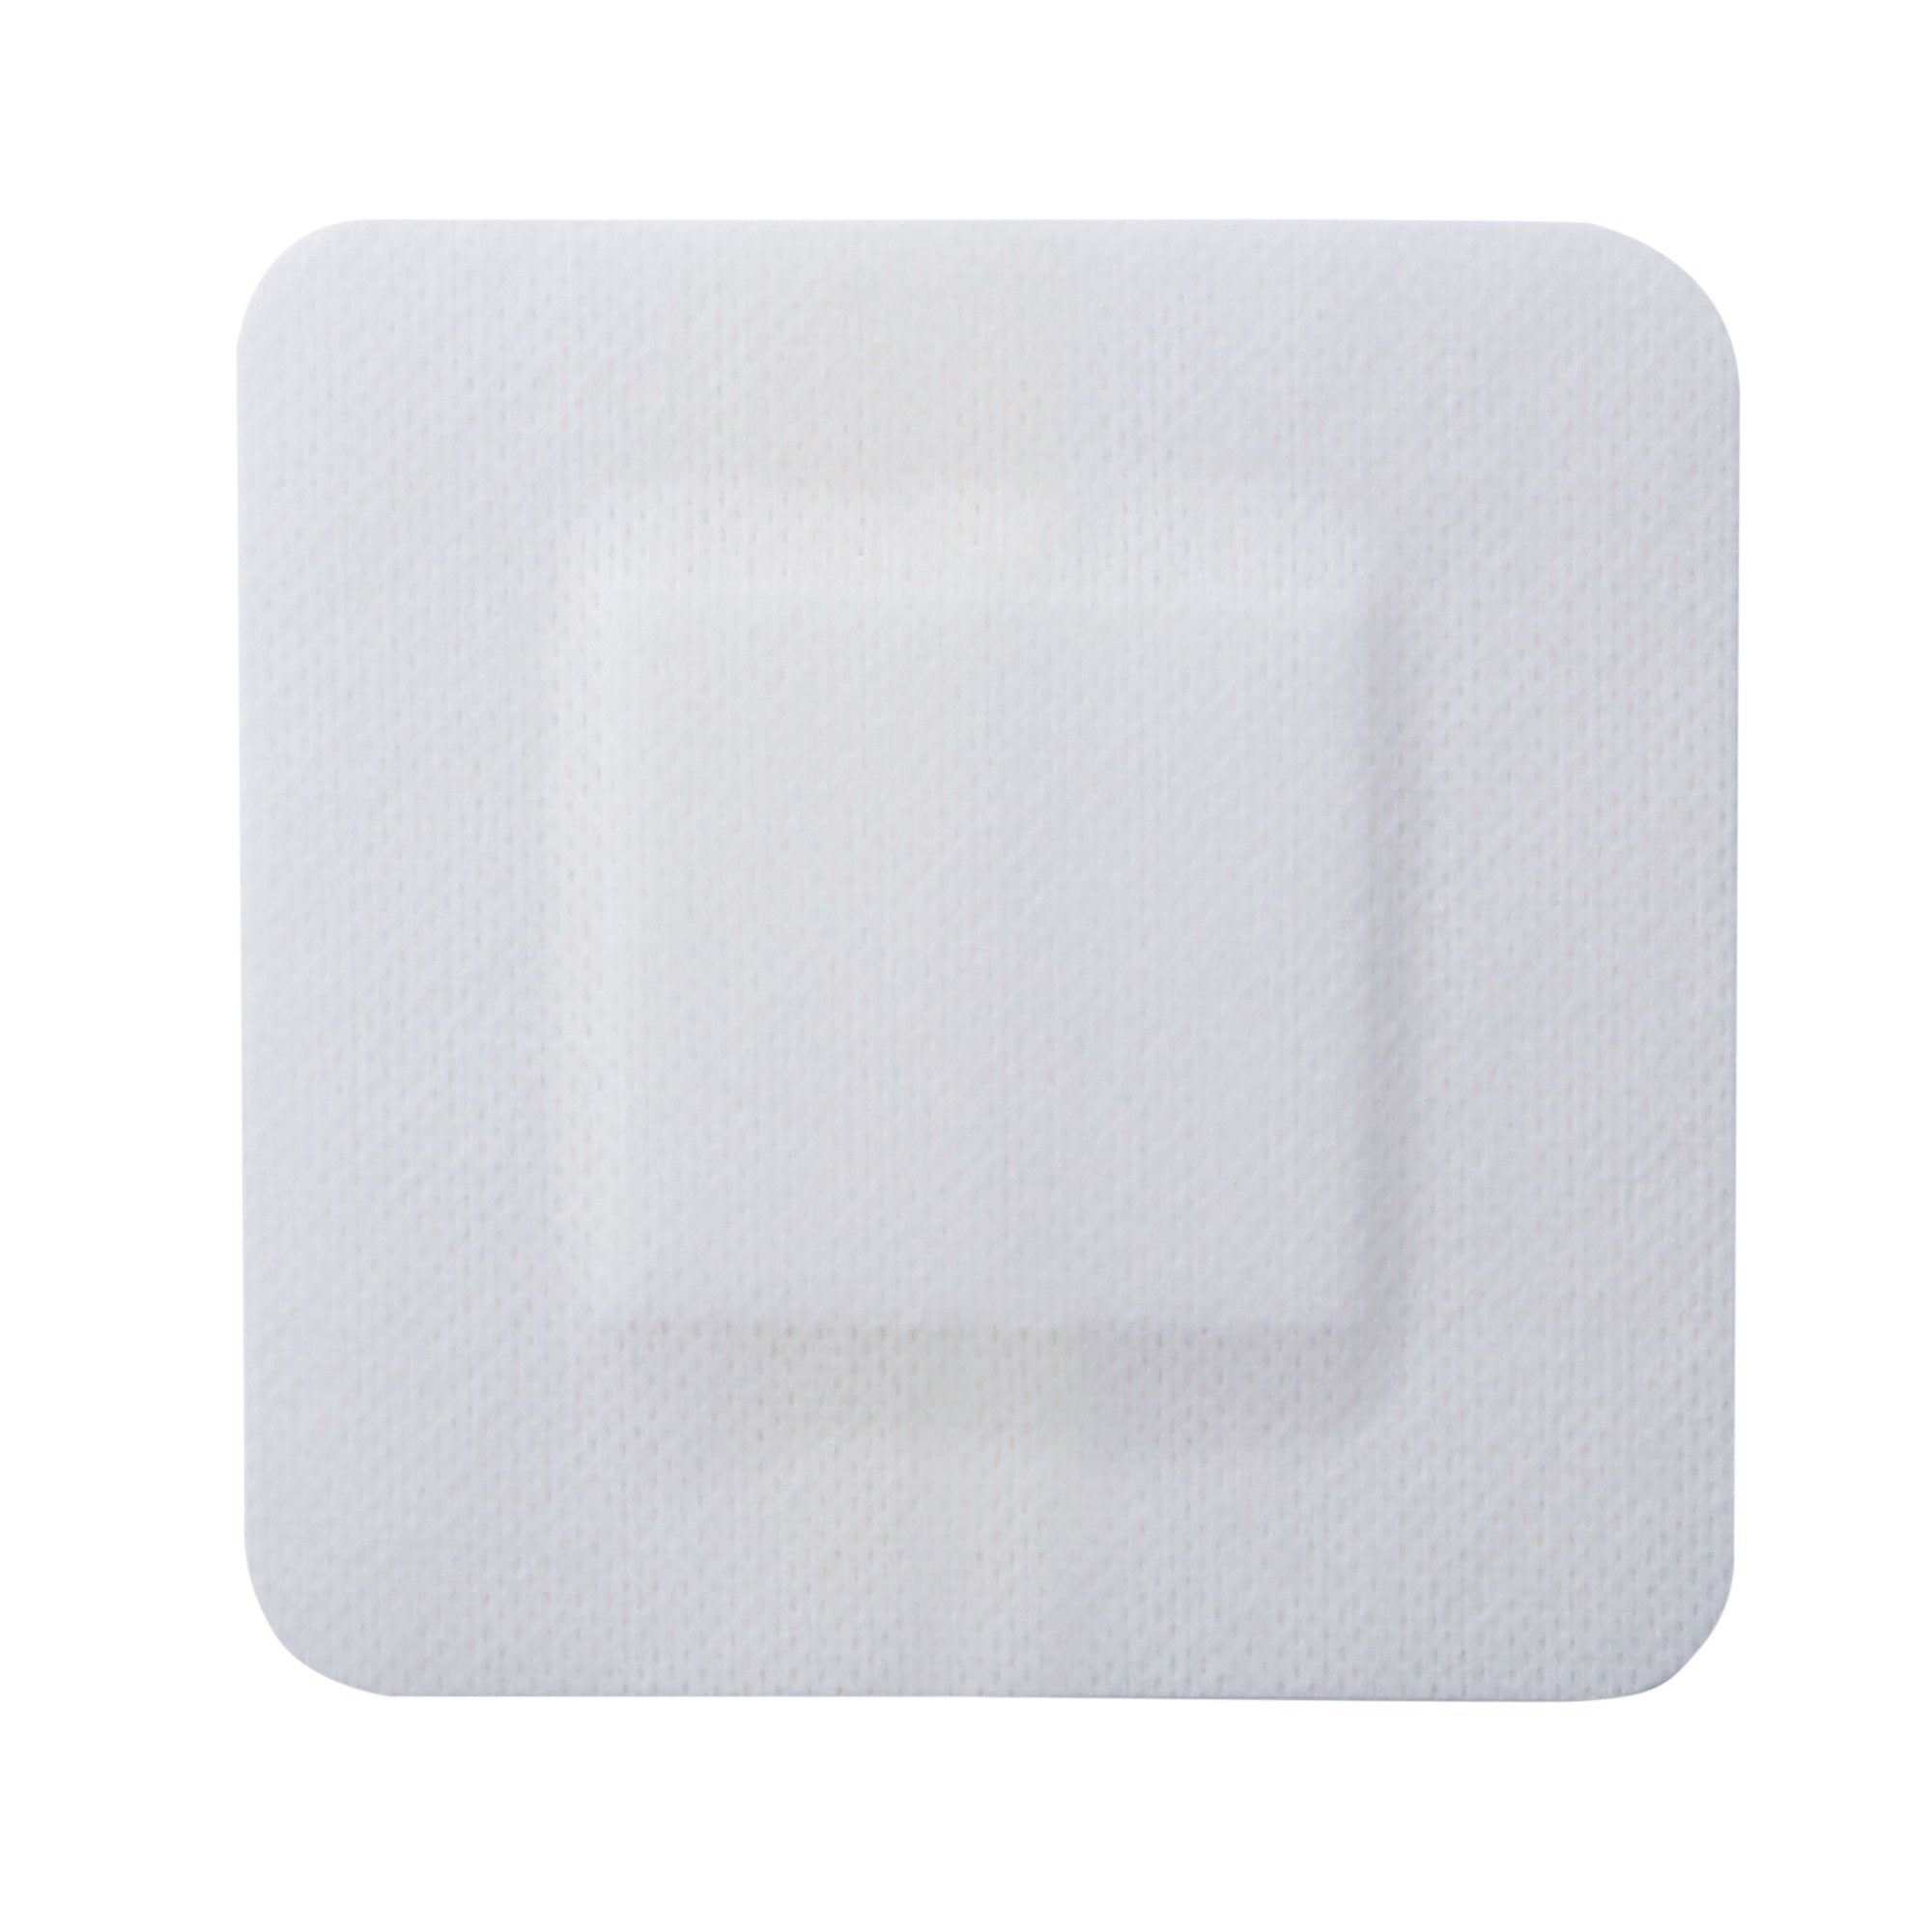 Adhesive Dressing McKesson 4 X 4 Inch Polypropylene / Rayon Square White Sterile